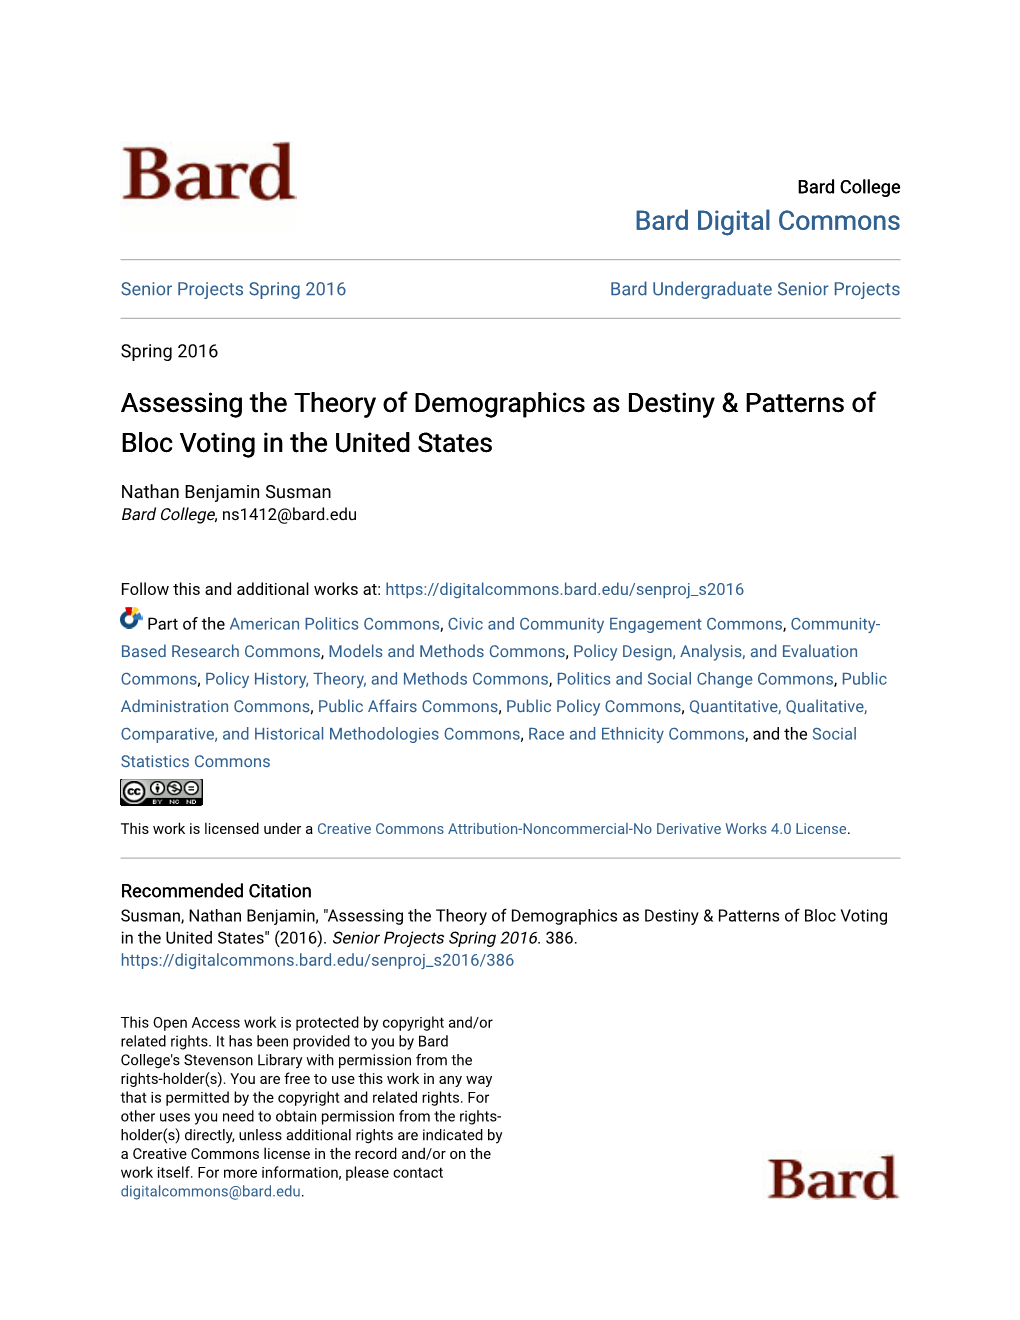 Assessing the Theory of Demographics As Destiny & Patterns of Bloc Voting in the United States